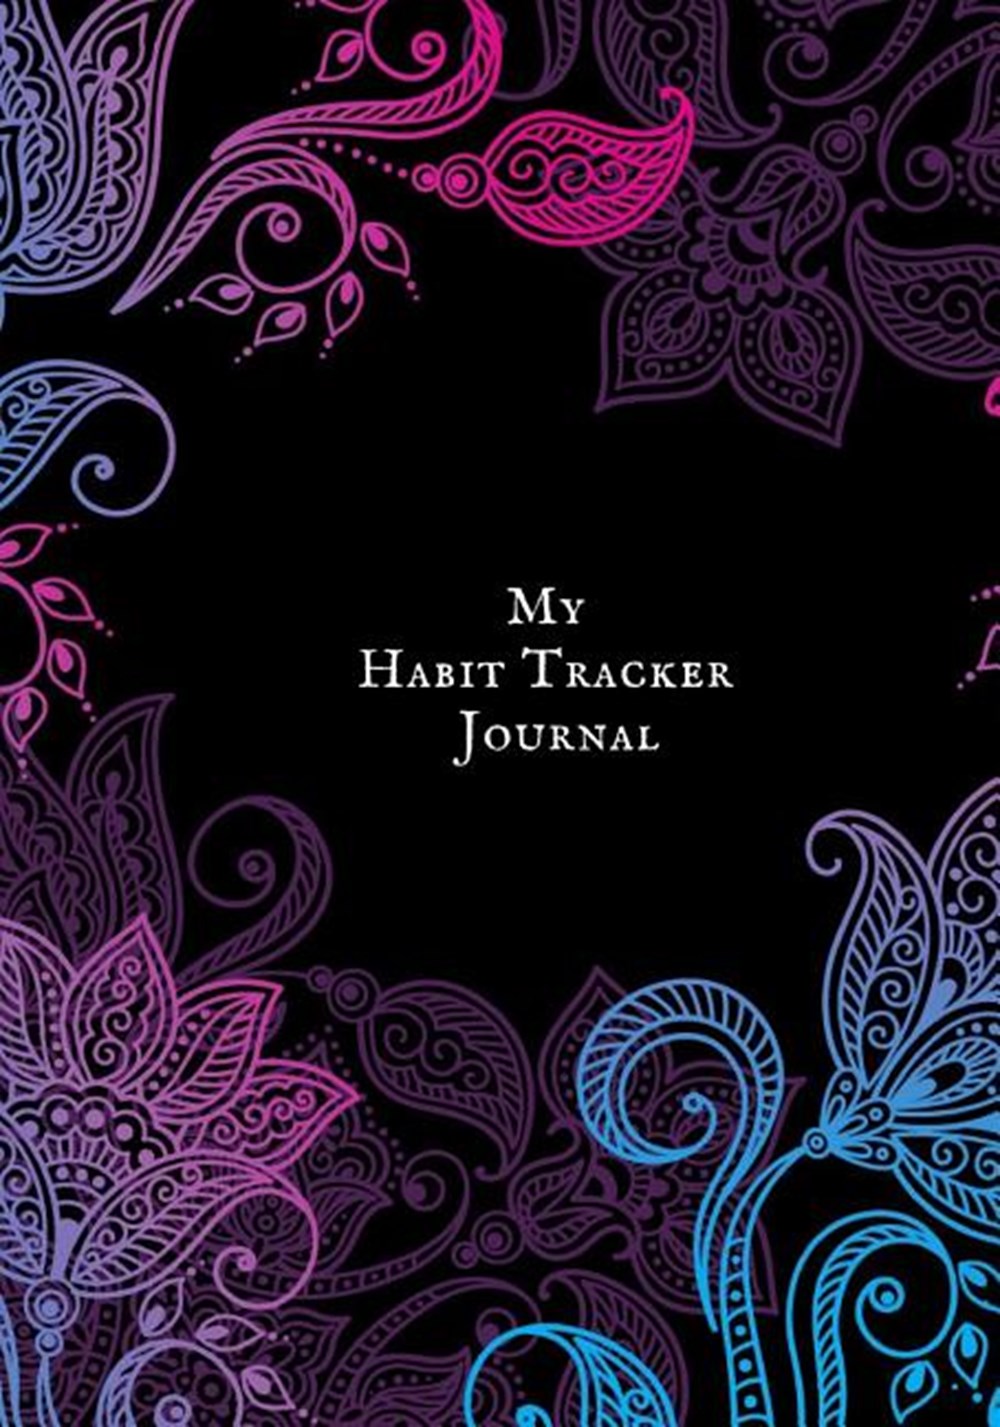 My Habit Tracker Journal Daily Planner Journal to build Healthy Routine - Organizer your Priorities 